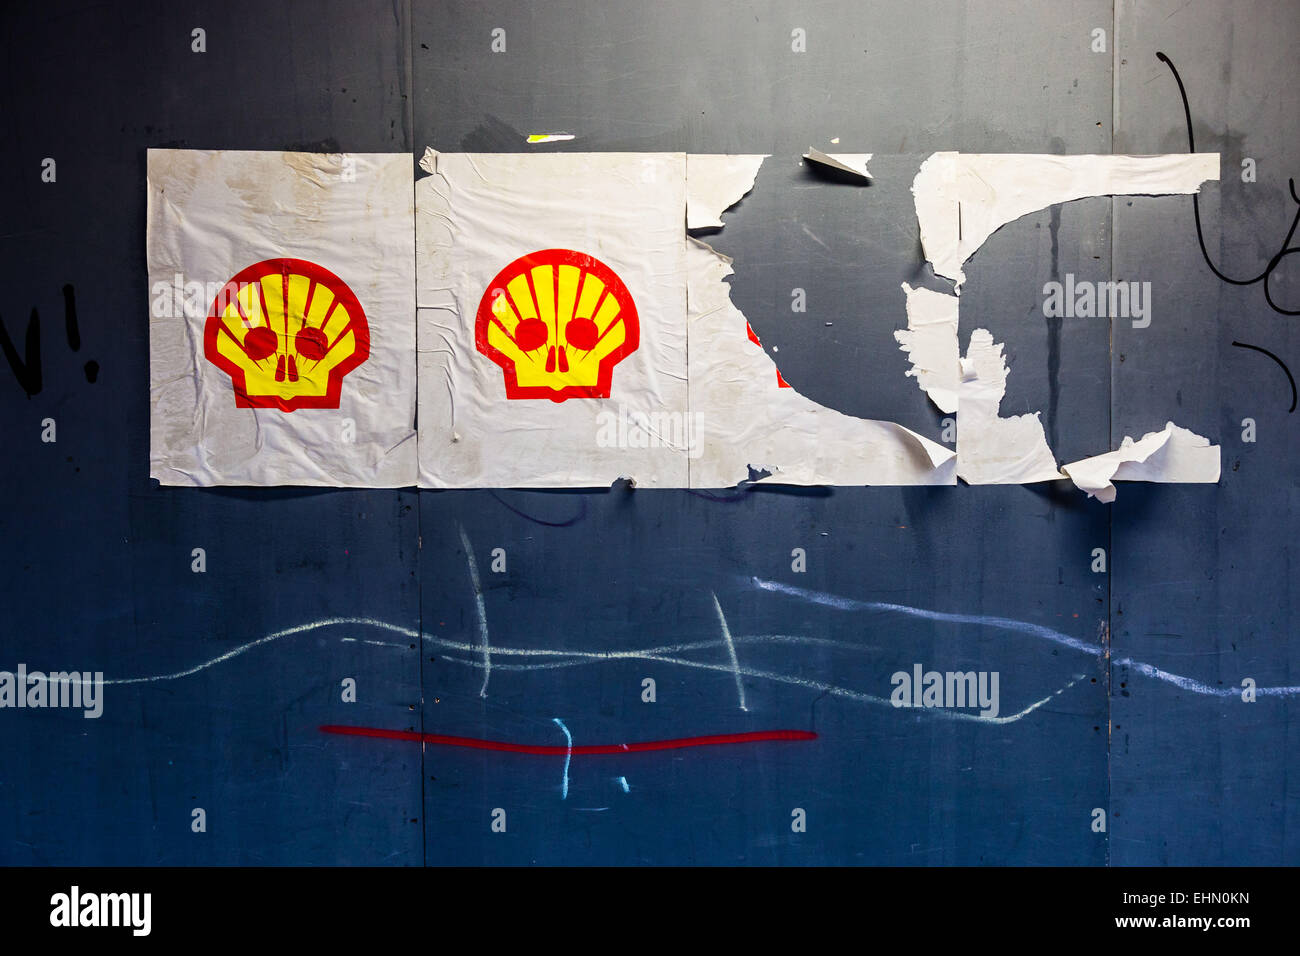 Logo of the oil company Shell hijacked by environmental activists denouncing the responsibility of Shell's oil pollution. Stock Photo